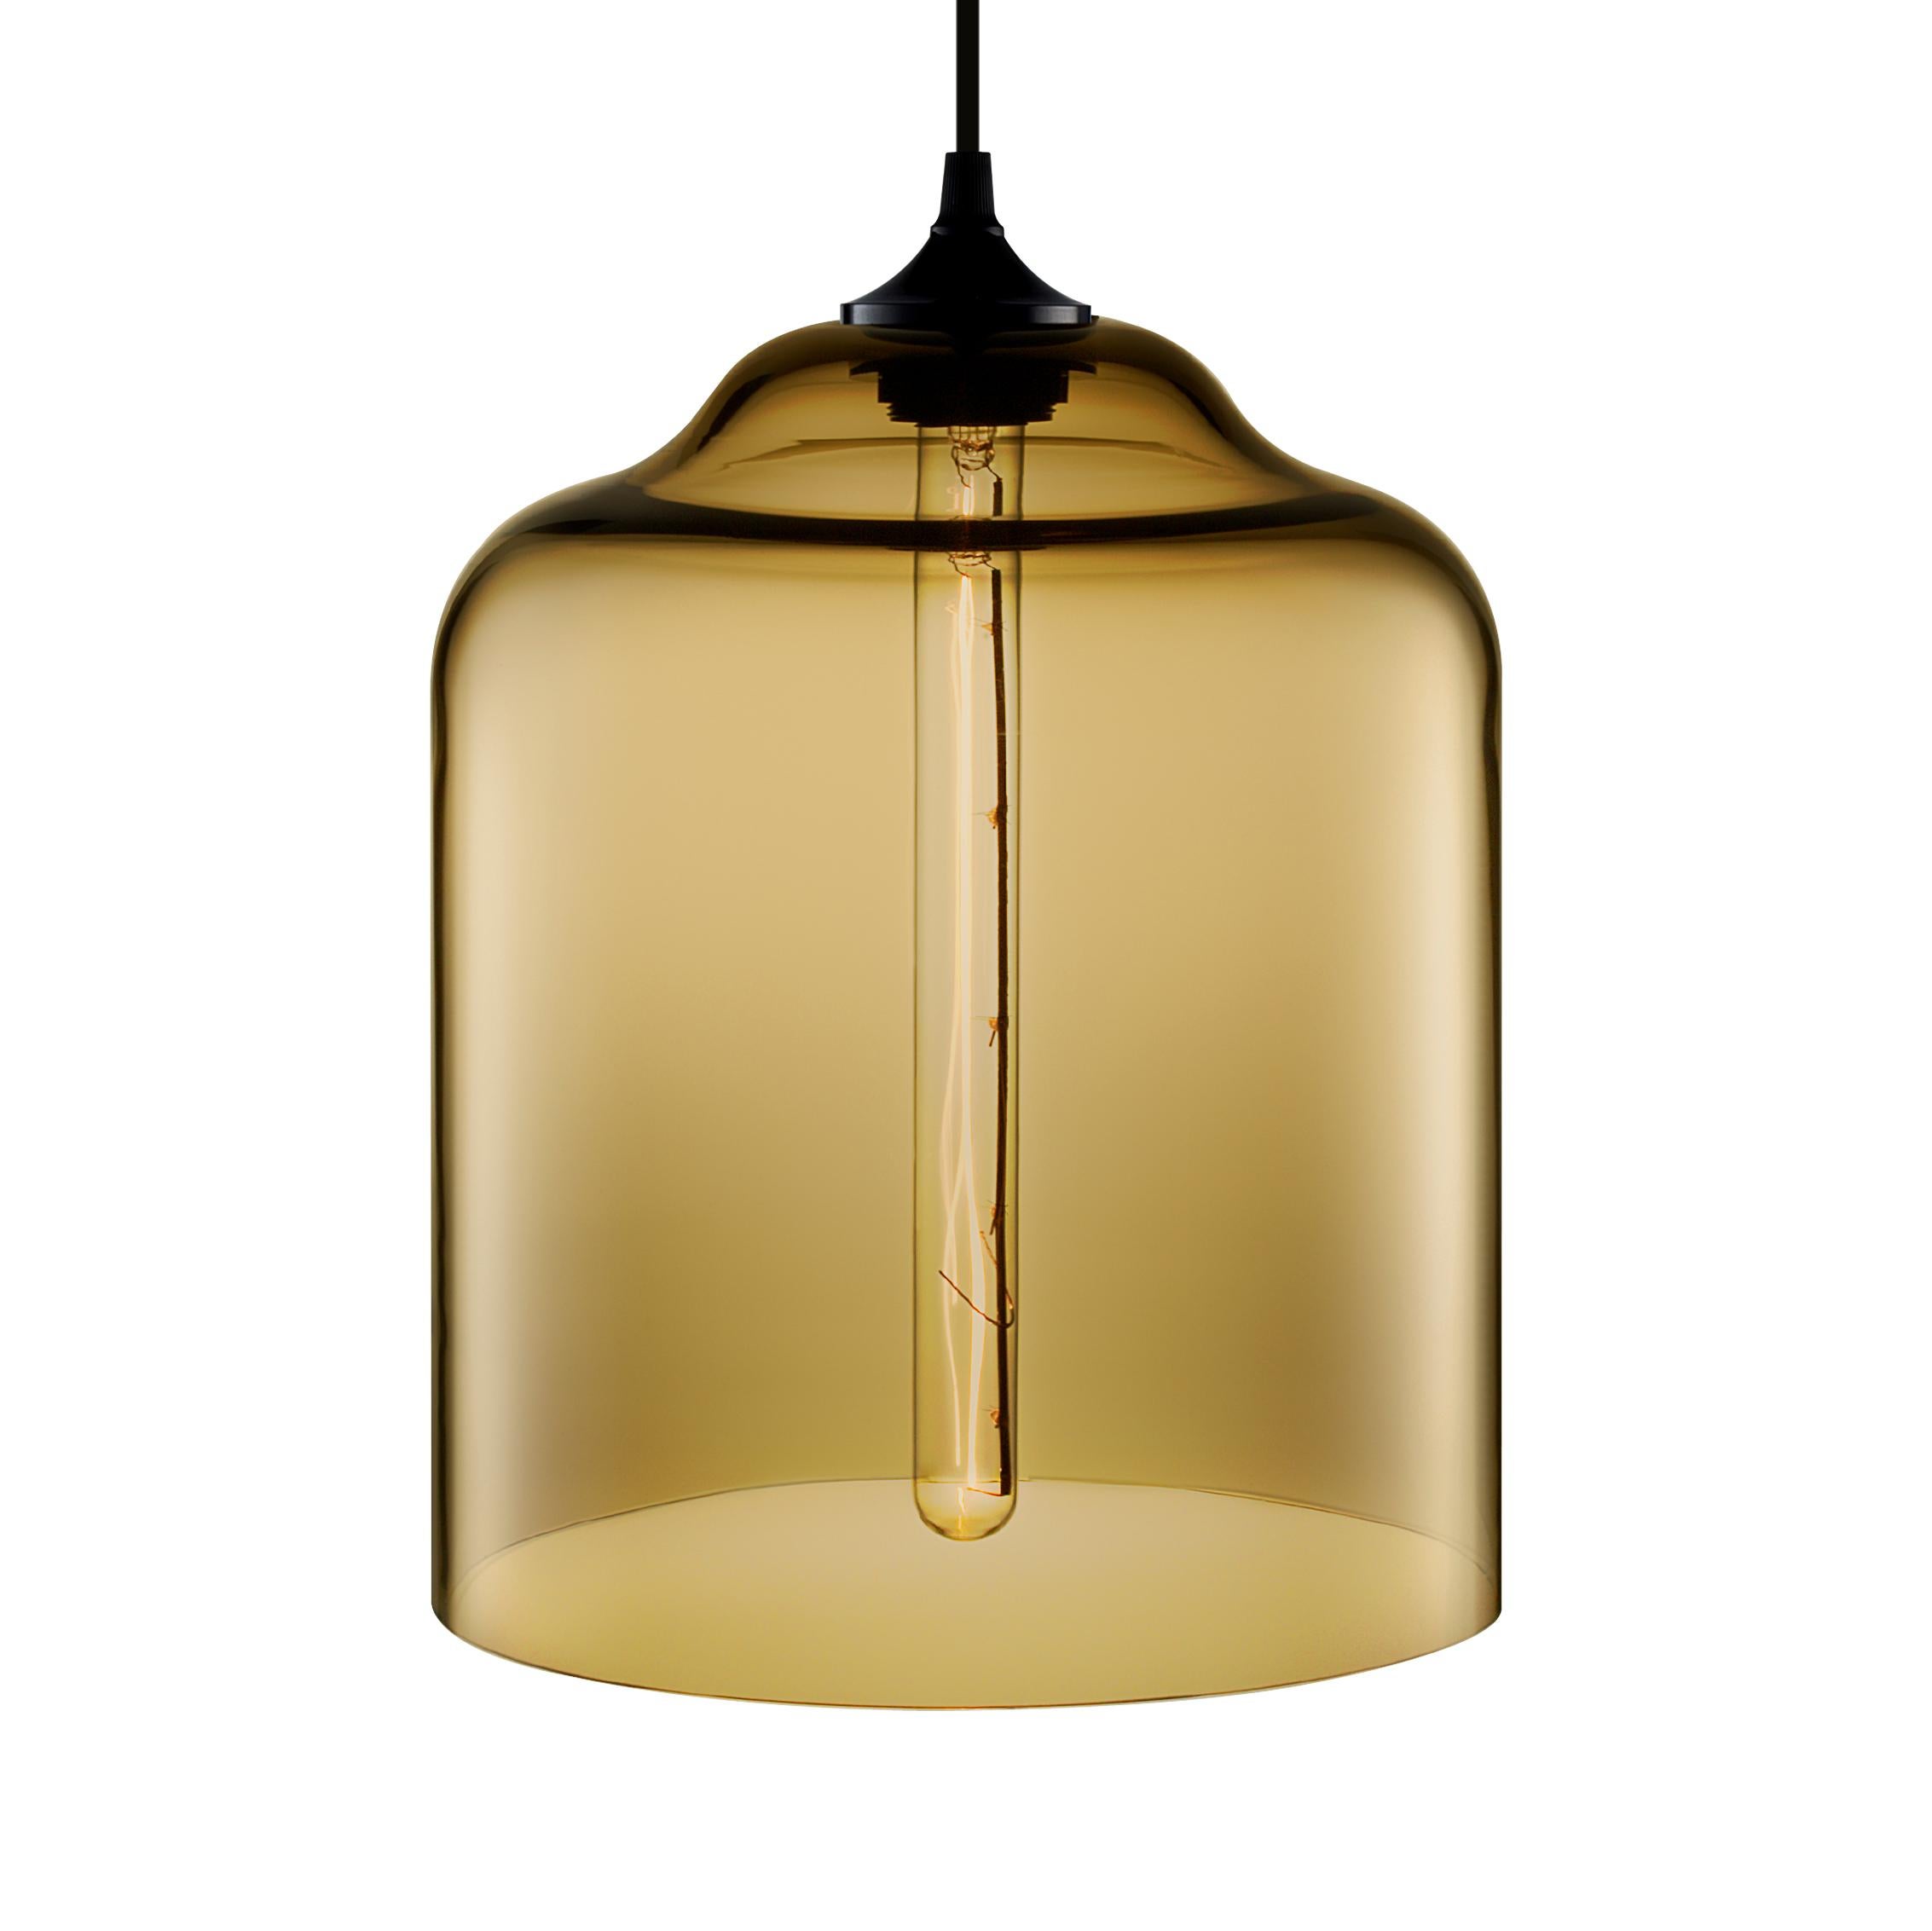 Bell Jar Sapphire Handblown Modern Glass Pendant Light, Made in the USA In New Condition For Sale In Beacon, NY